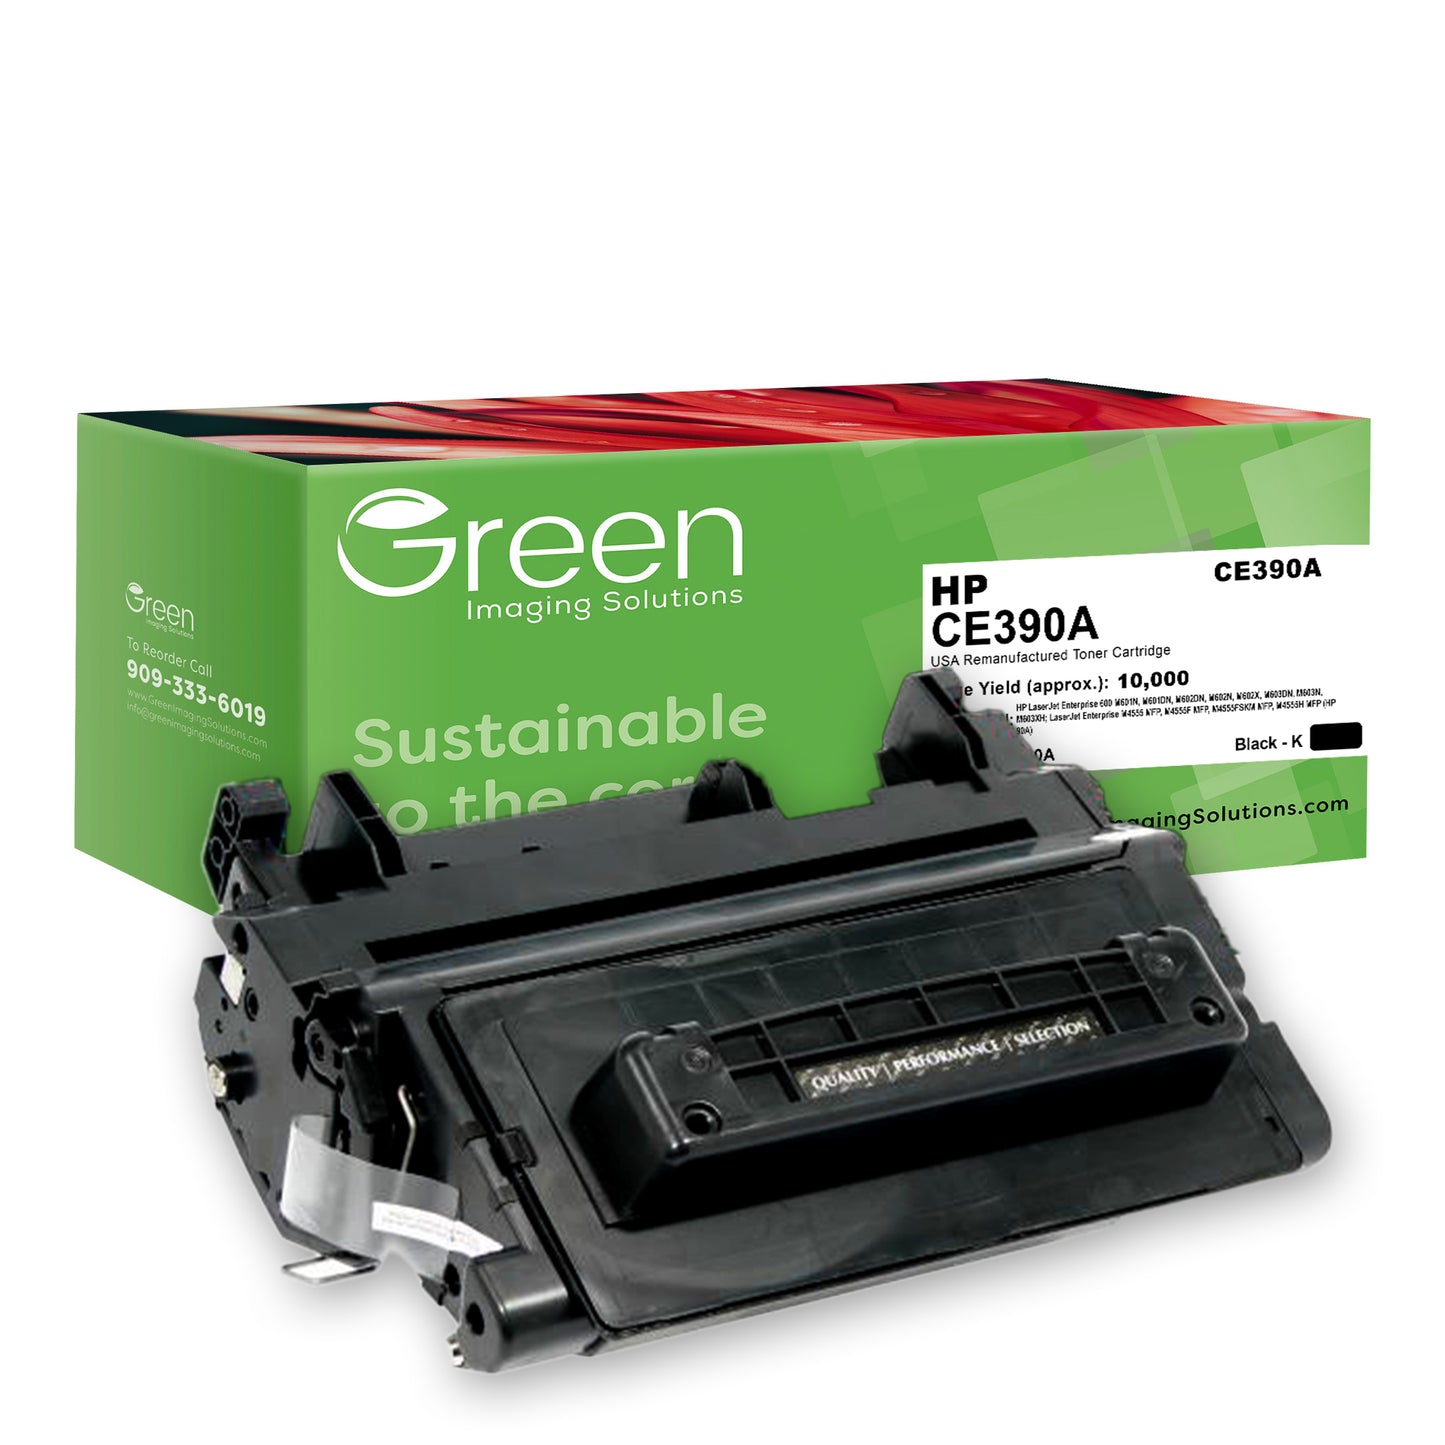 GIS USA Remanufactured Toner Cartridge for HP CE390A (HP 90A)